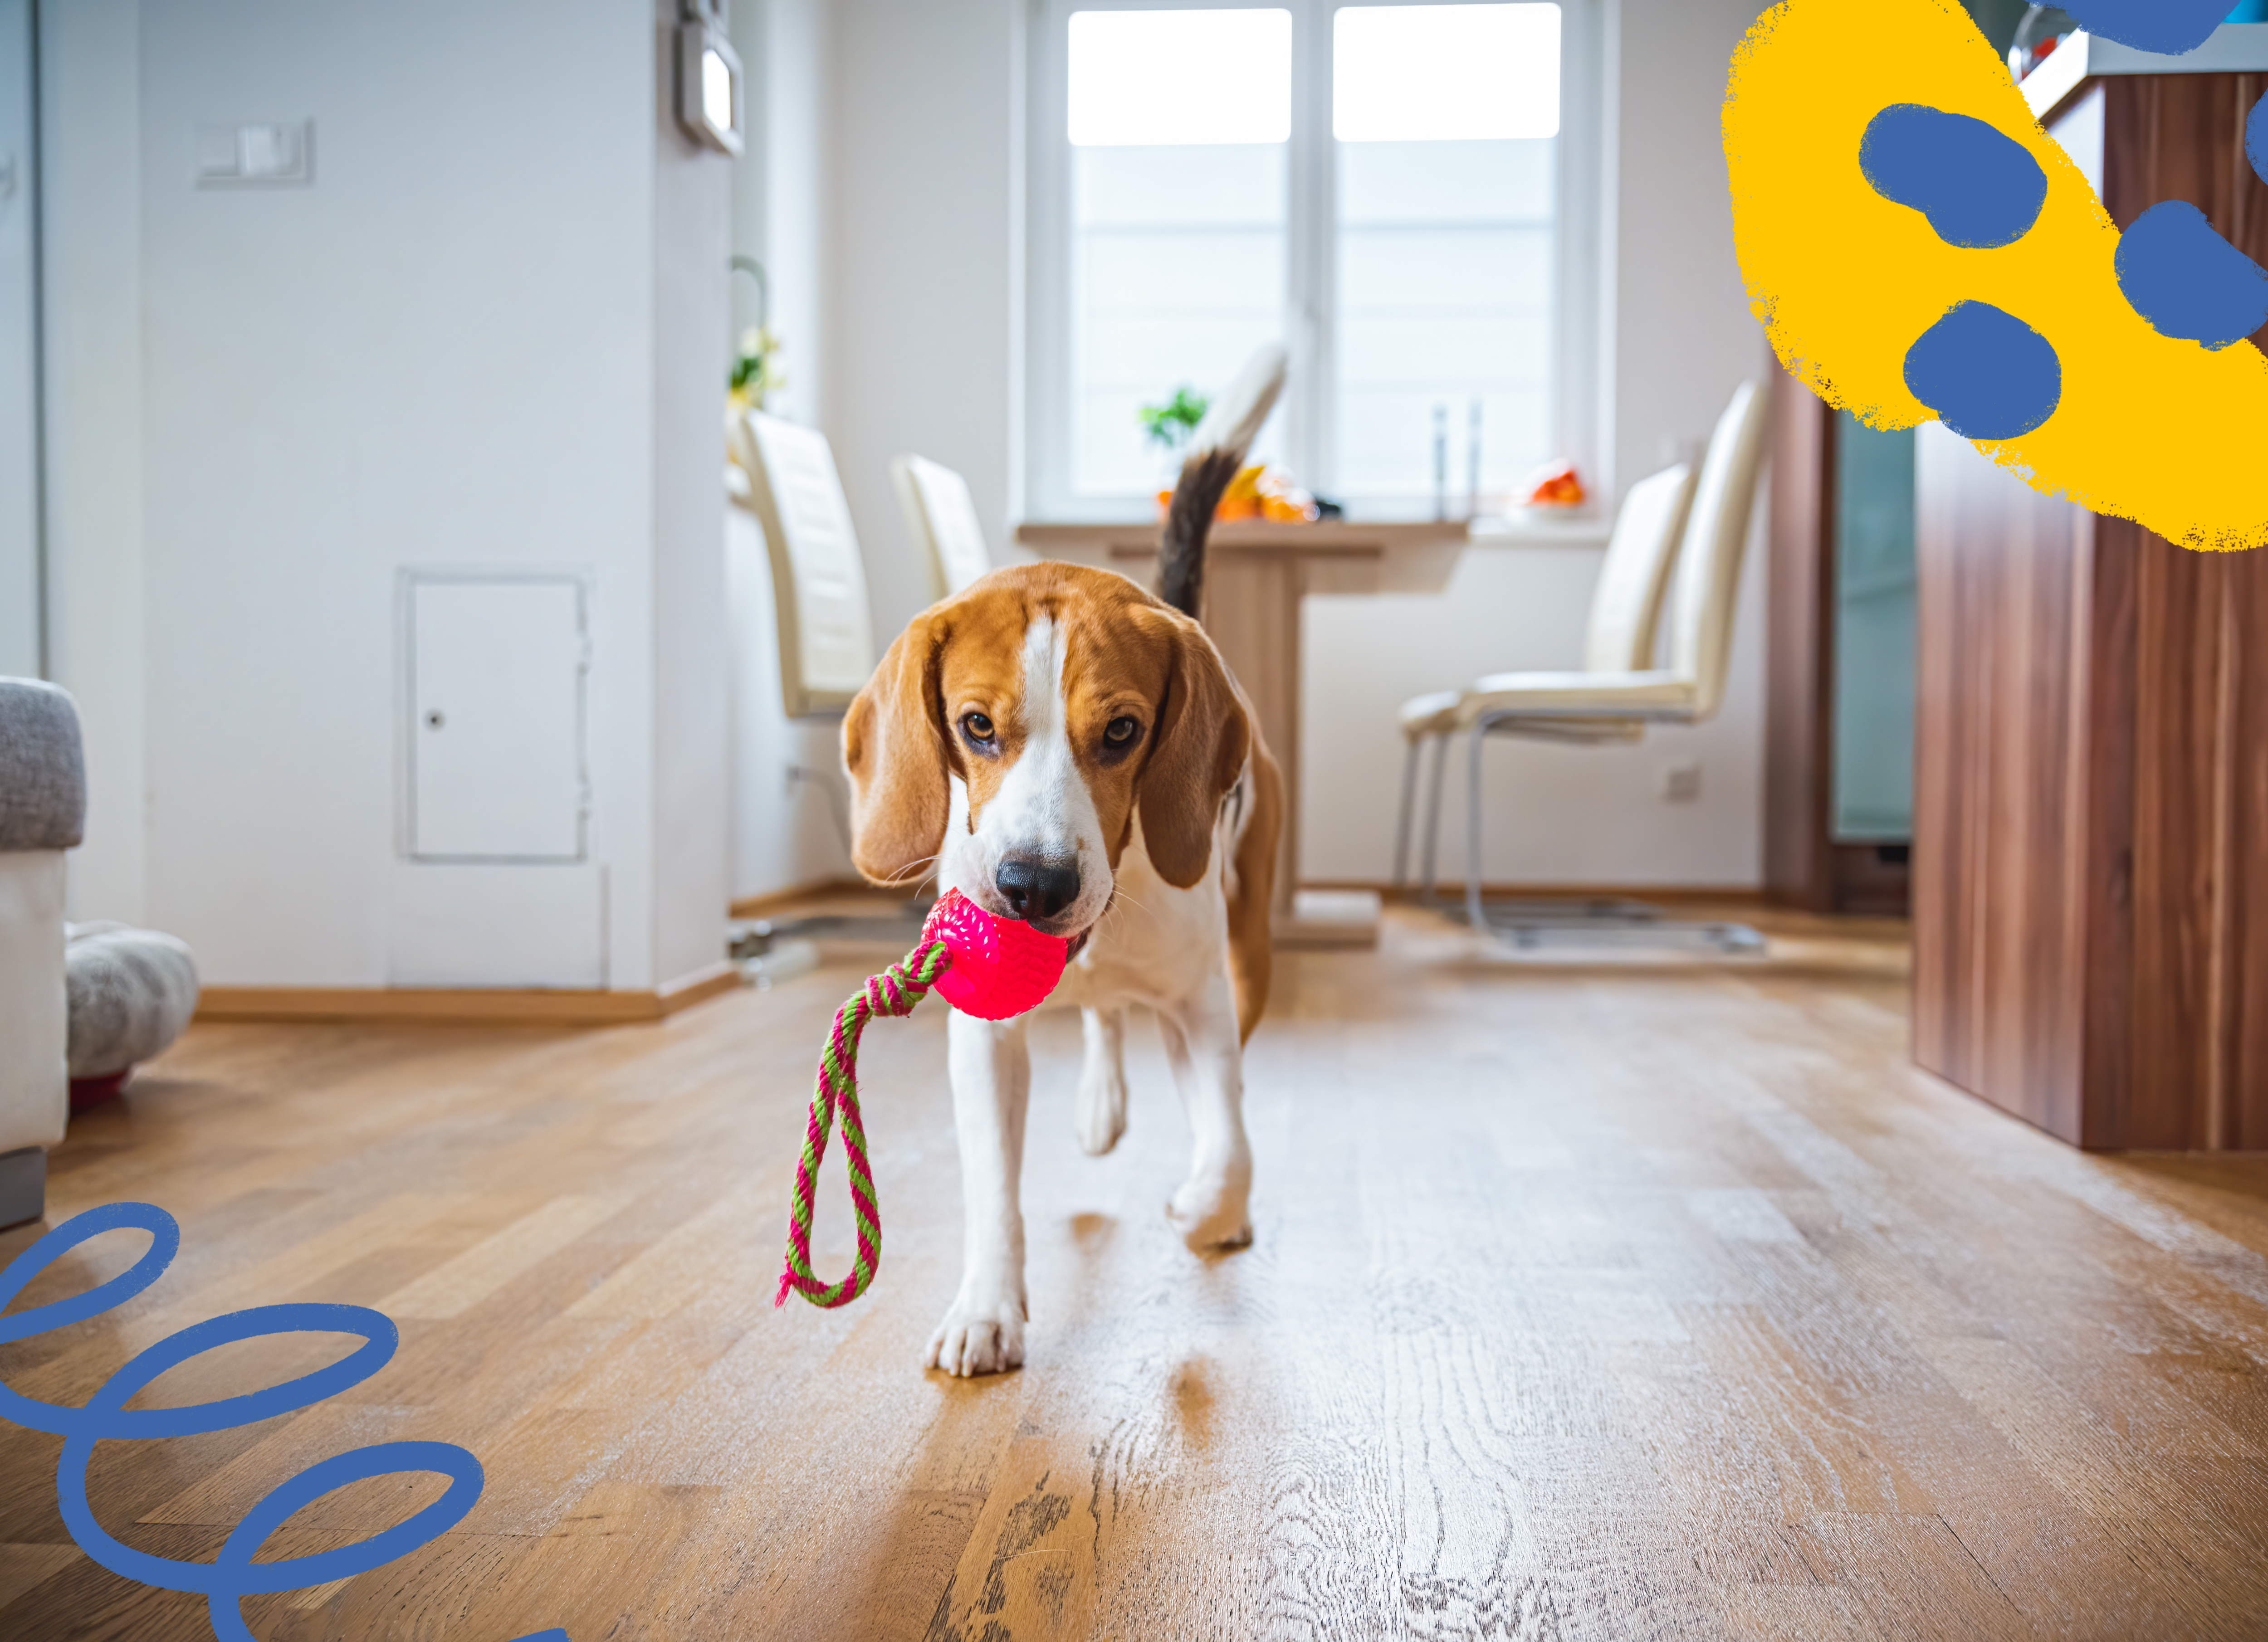 Hound dog holding onto a ball toy while walking inside a home